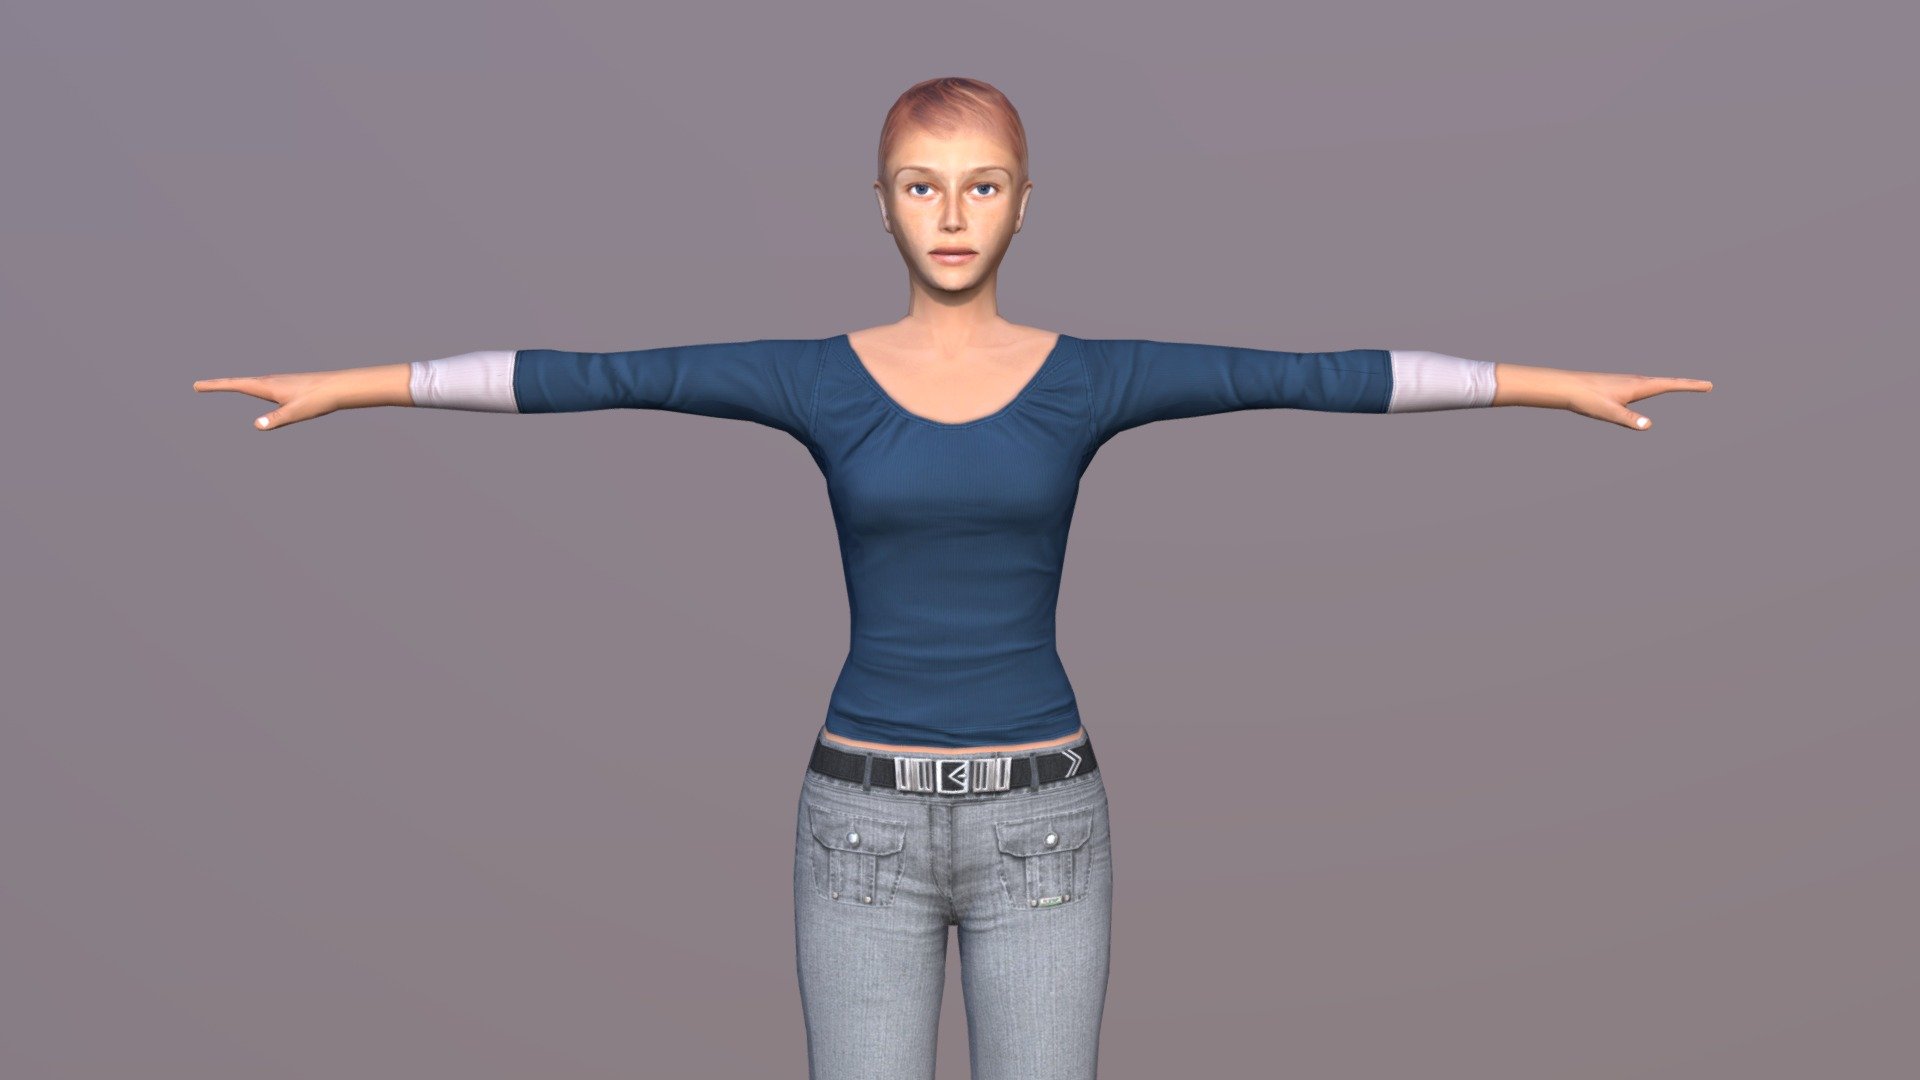 FOR FULL DETAILS+PREVIEW - LINK


Woman_04
(LOW POLY FEMALE CHARACTER WITH 36 MORPHS + 52 ANIMATIONS)

FEATURES




LOW POLY / RIGGED / ANIMATED

BONE RIG

SKIN POSE = T-POSE

UNREAL ENGINE EPIC SKELETON+EXTRA BONES (SKELETON TREE IN PREVIEW IMAGES)

SUPPORT ANIMATIONS FROM THE UNREAL MANNEQUIN

36 MORPH CONTROLS (LISTED IN PREVIEW)

52 ANIMATIONS (LISTED IN PREVIEW)

ANIMATIONS ARE AVAILABLE IN BOTH ROOT MOTION &amp; IN-PLACE

04 LOD GROUPS

SINGLE MESH/SINGLE MATERIAL

PBR 4K TEXTURES

UNWRAPPED UV

AVAILABLE FILE FORMATS




UNREAL ENGINE-4.25

UNITY-2019

3DS MAX-2017

MAYA-2017

BLENDER-3.2

CINEMA 4D-R21

FBX&ndash;BOTH Z-UP &amp; Y-UP

OBJ

POLY COUNT




LOD0-5690(POLY,TRI) 2961(VERT)

LOD1-80%

LOD2-50%

LOD3-30%

TEXTURE RESOLUTION




DIFFUSE

NORMAL_MAP

SPECULAR

ROUGHNESS 

ALL TEXTURES IN 4096X4096 - Woman 4 - Buy Royalty Free 3D model by jasirkt 3d model